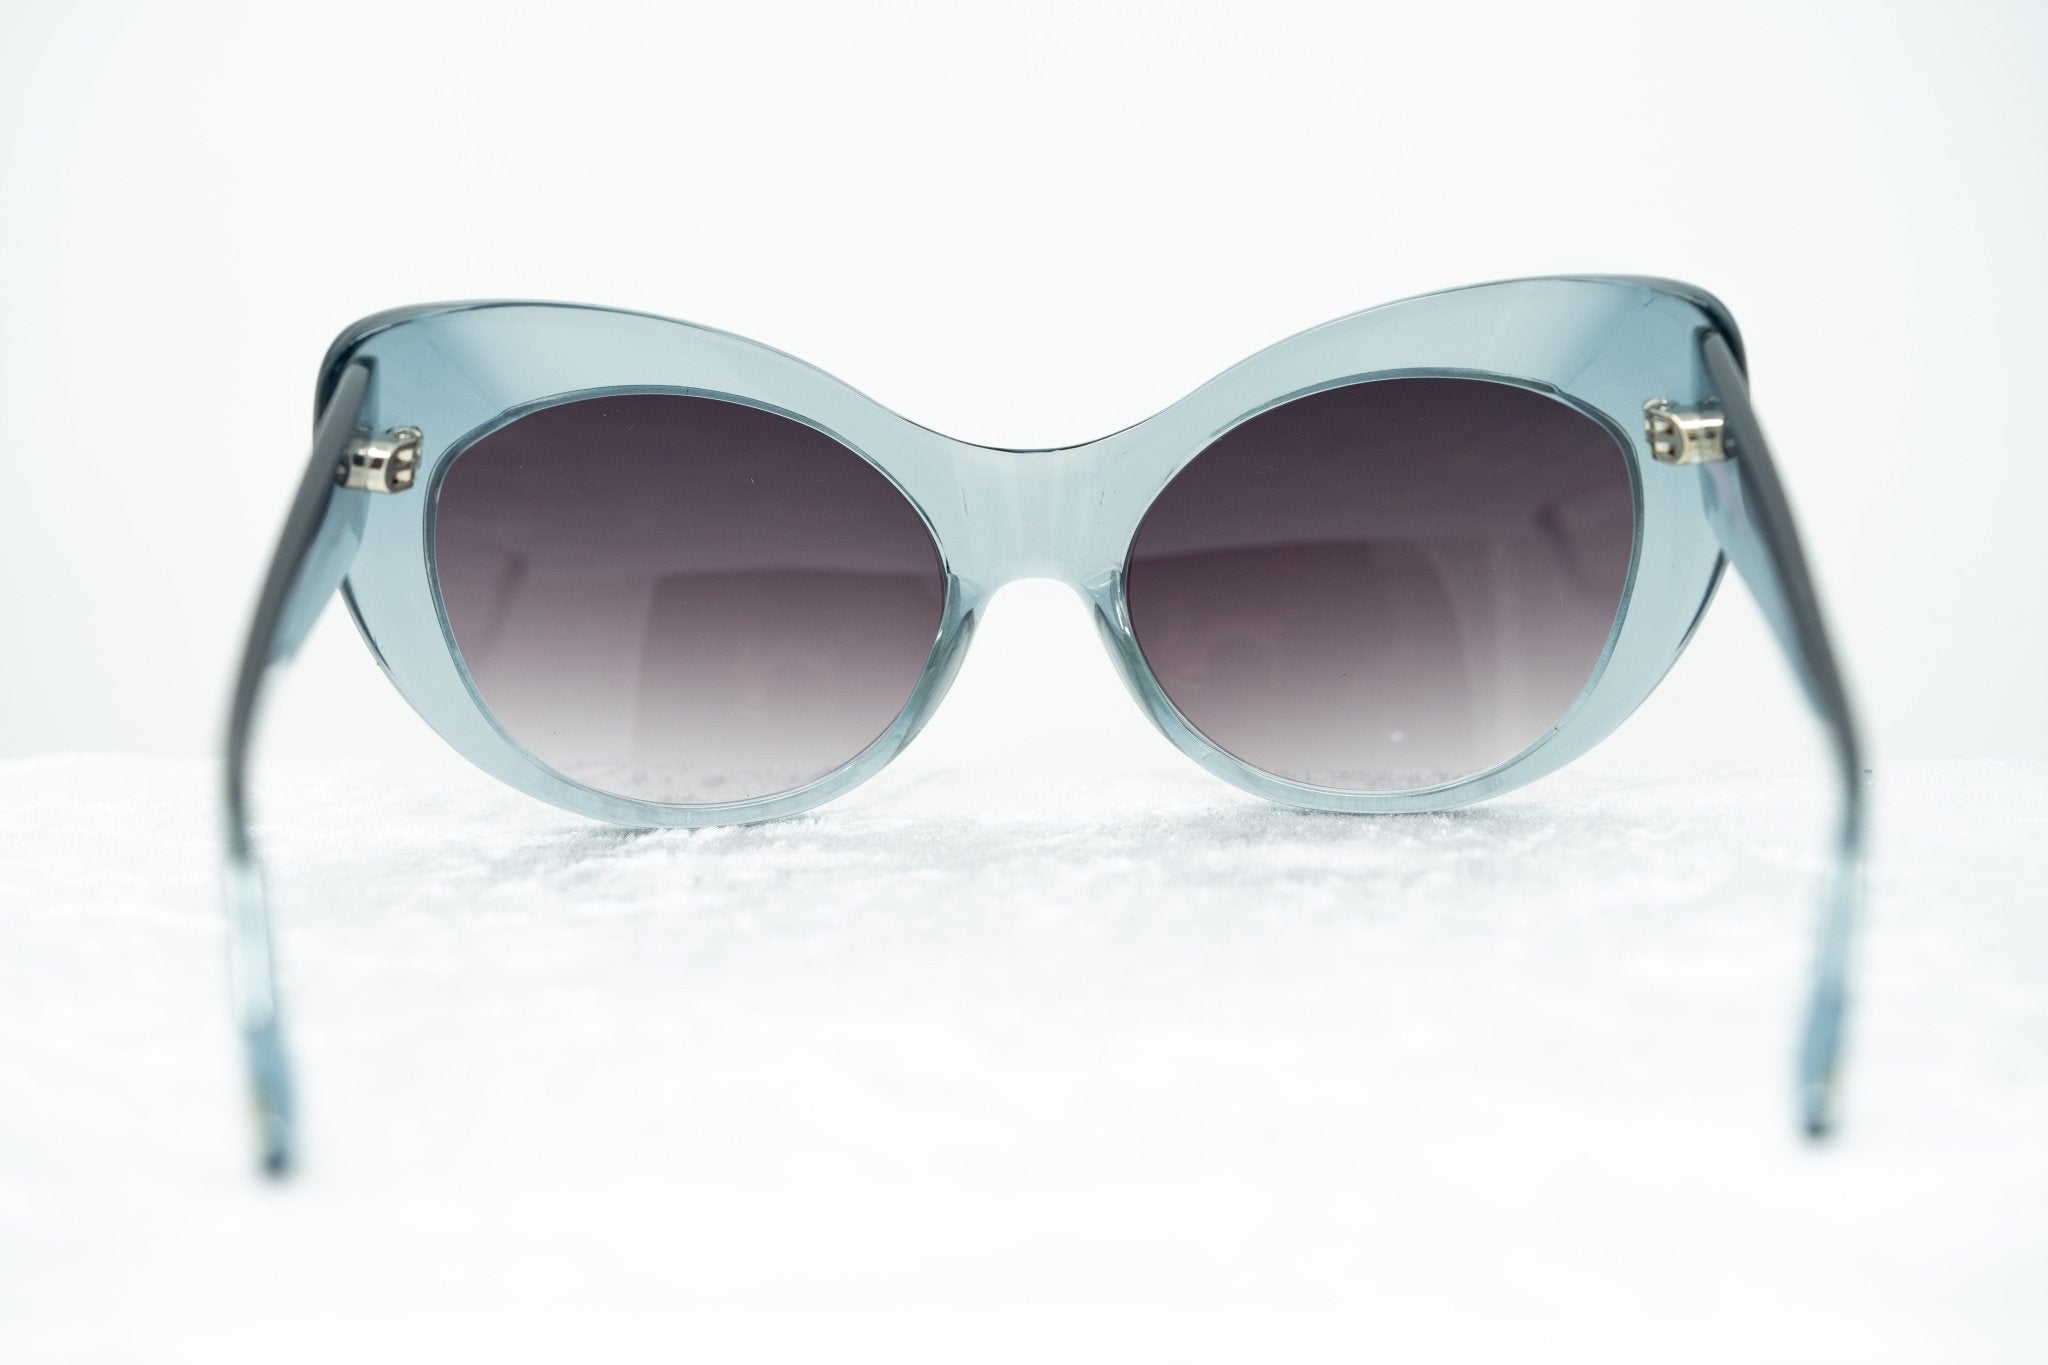 Agent Provocateur Women Sunglasses Cat Eye Blue and Grey Lenses Category 3 - AP54C7SUN - Watches & Crystals